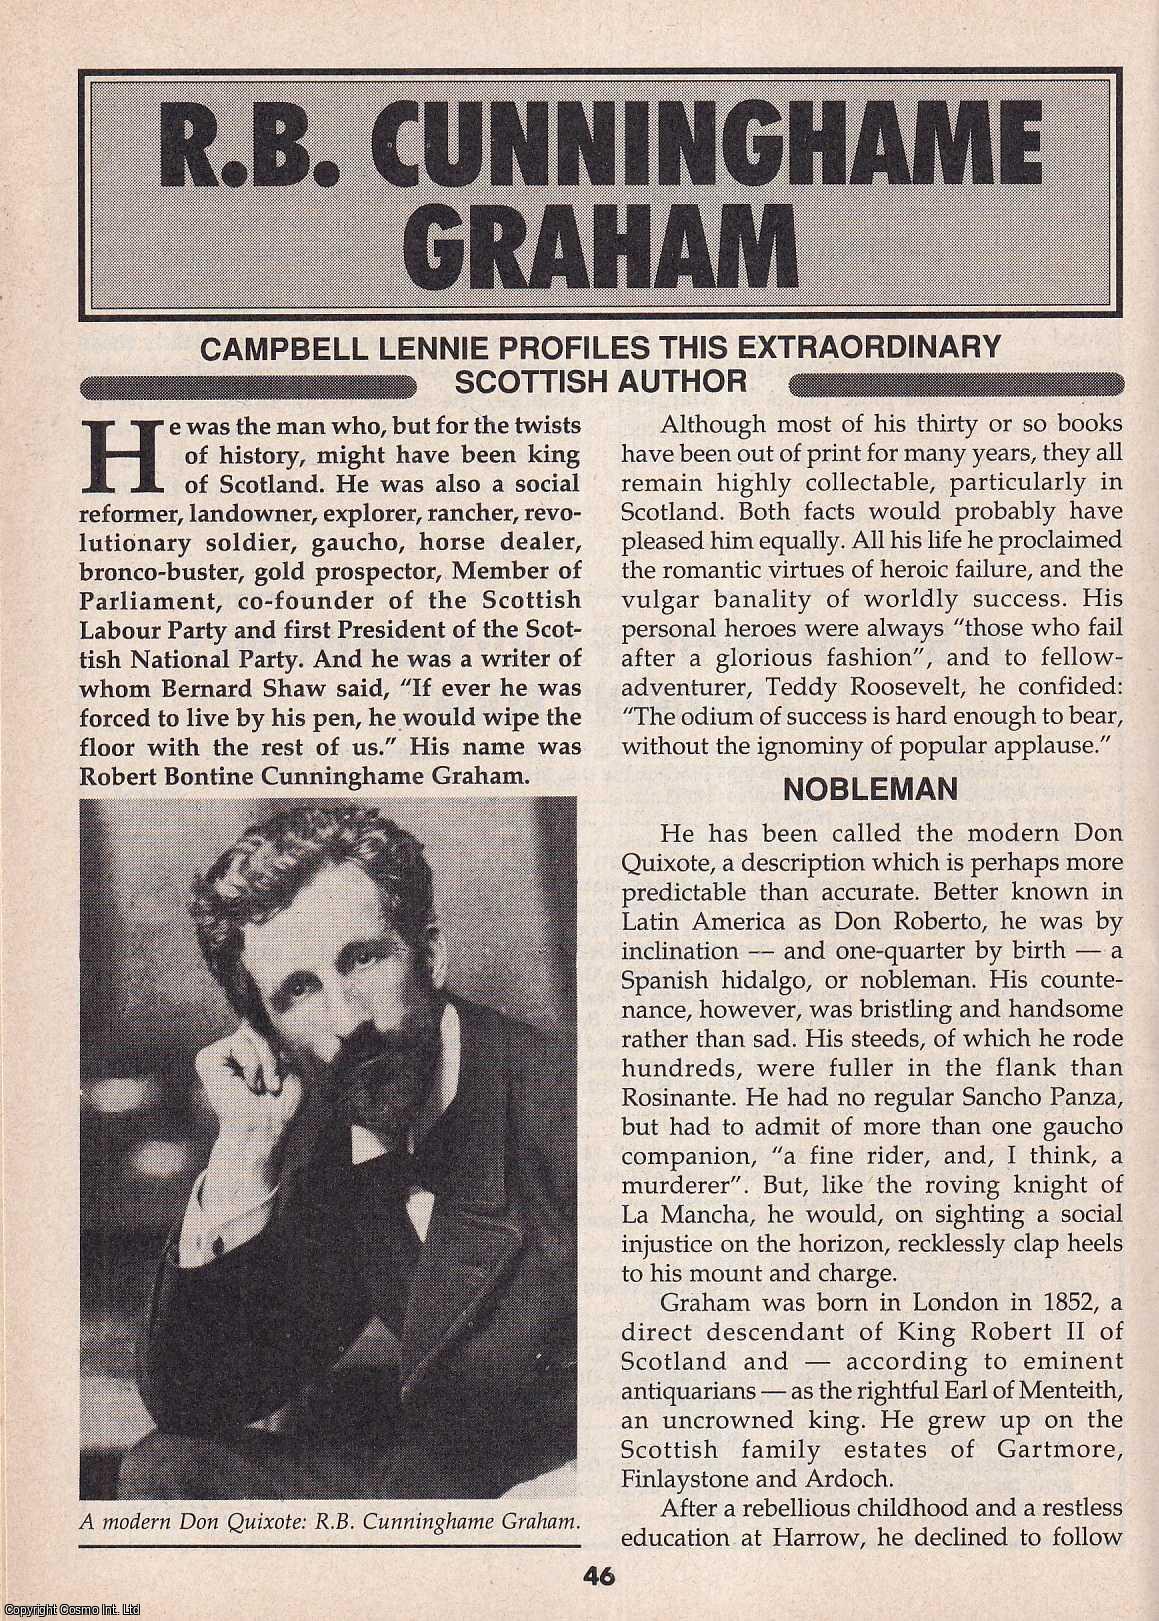 Campbell Lennie - R.B. Cunninghame Graham. Profiling this Extraordinary Scottish Author. This is an original article separated from an issue of The Book & Magazine Collector publication.